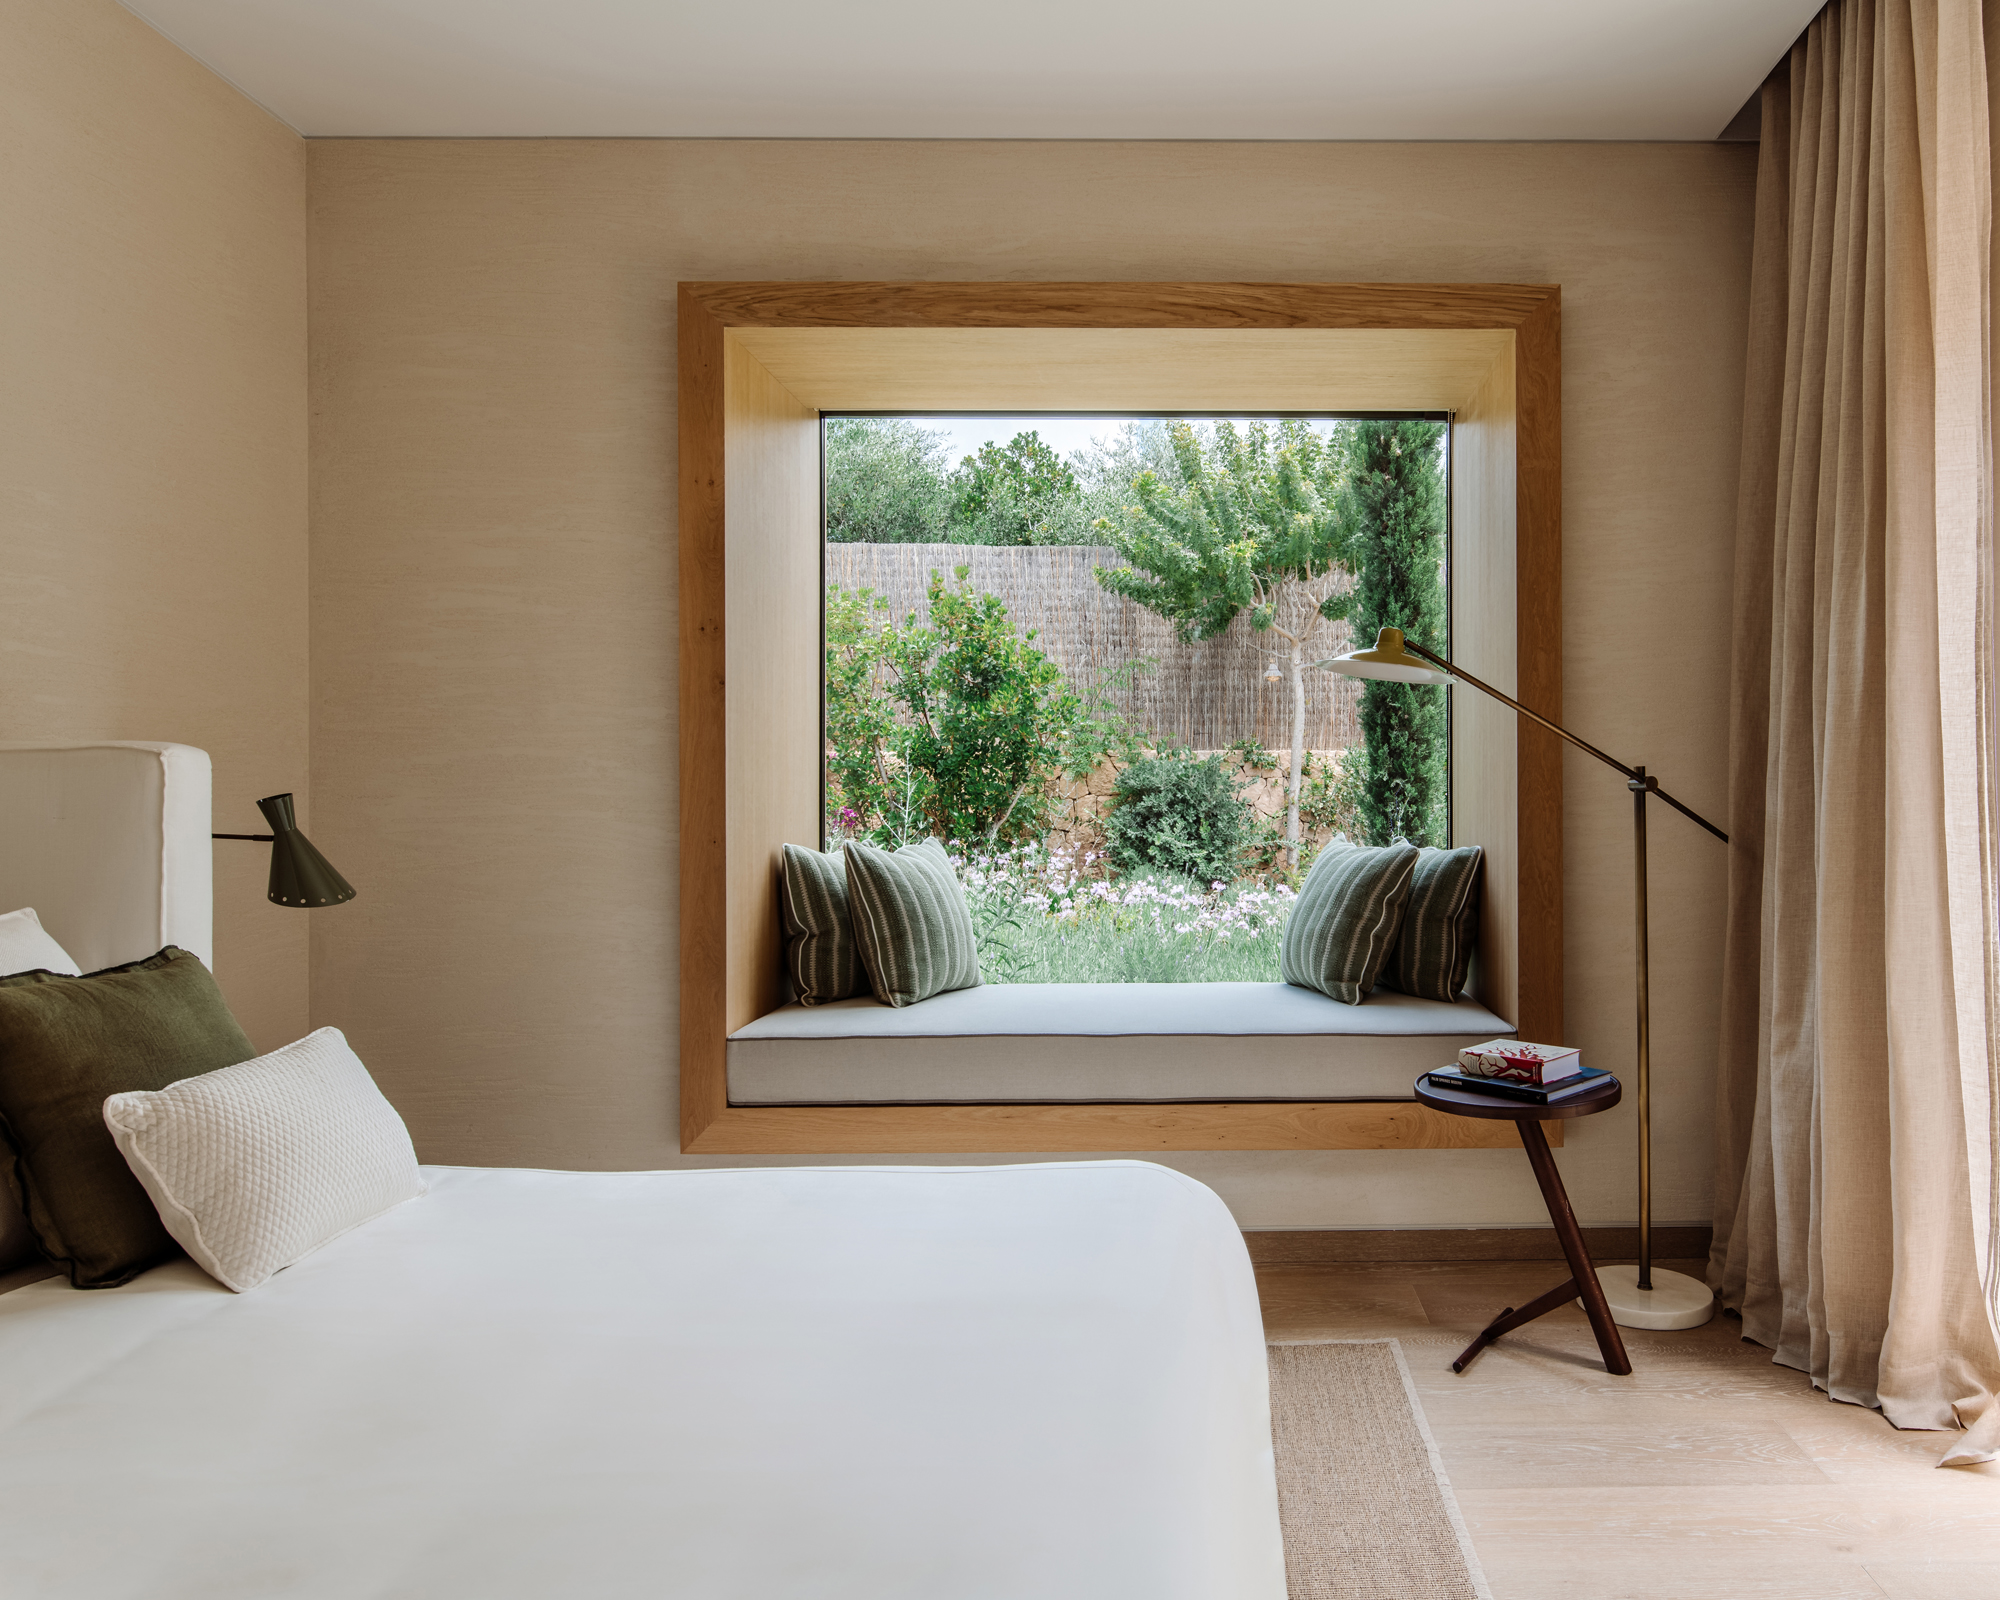 A guest bedroom in an Ibizan villa with window seat and green scatter cushions